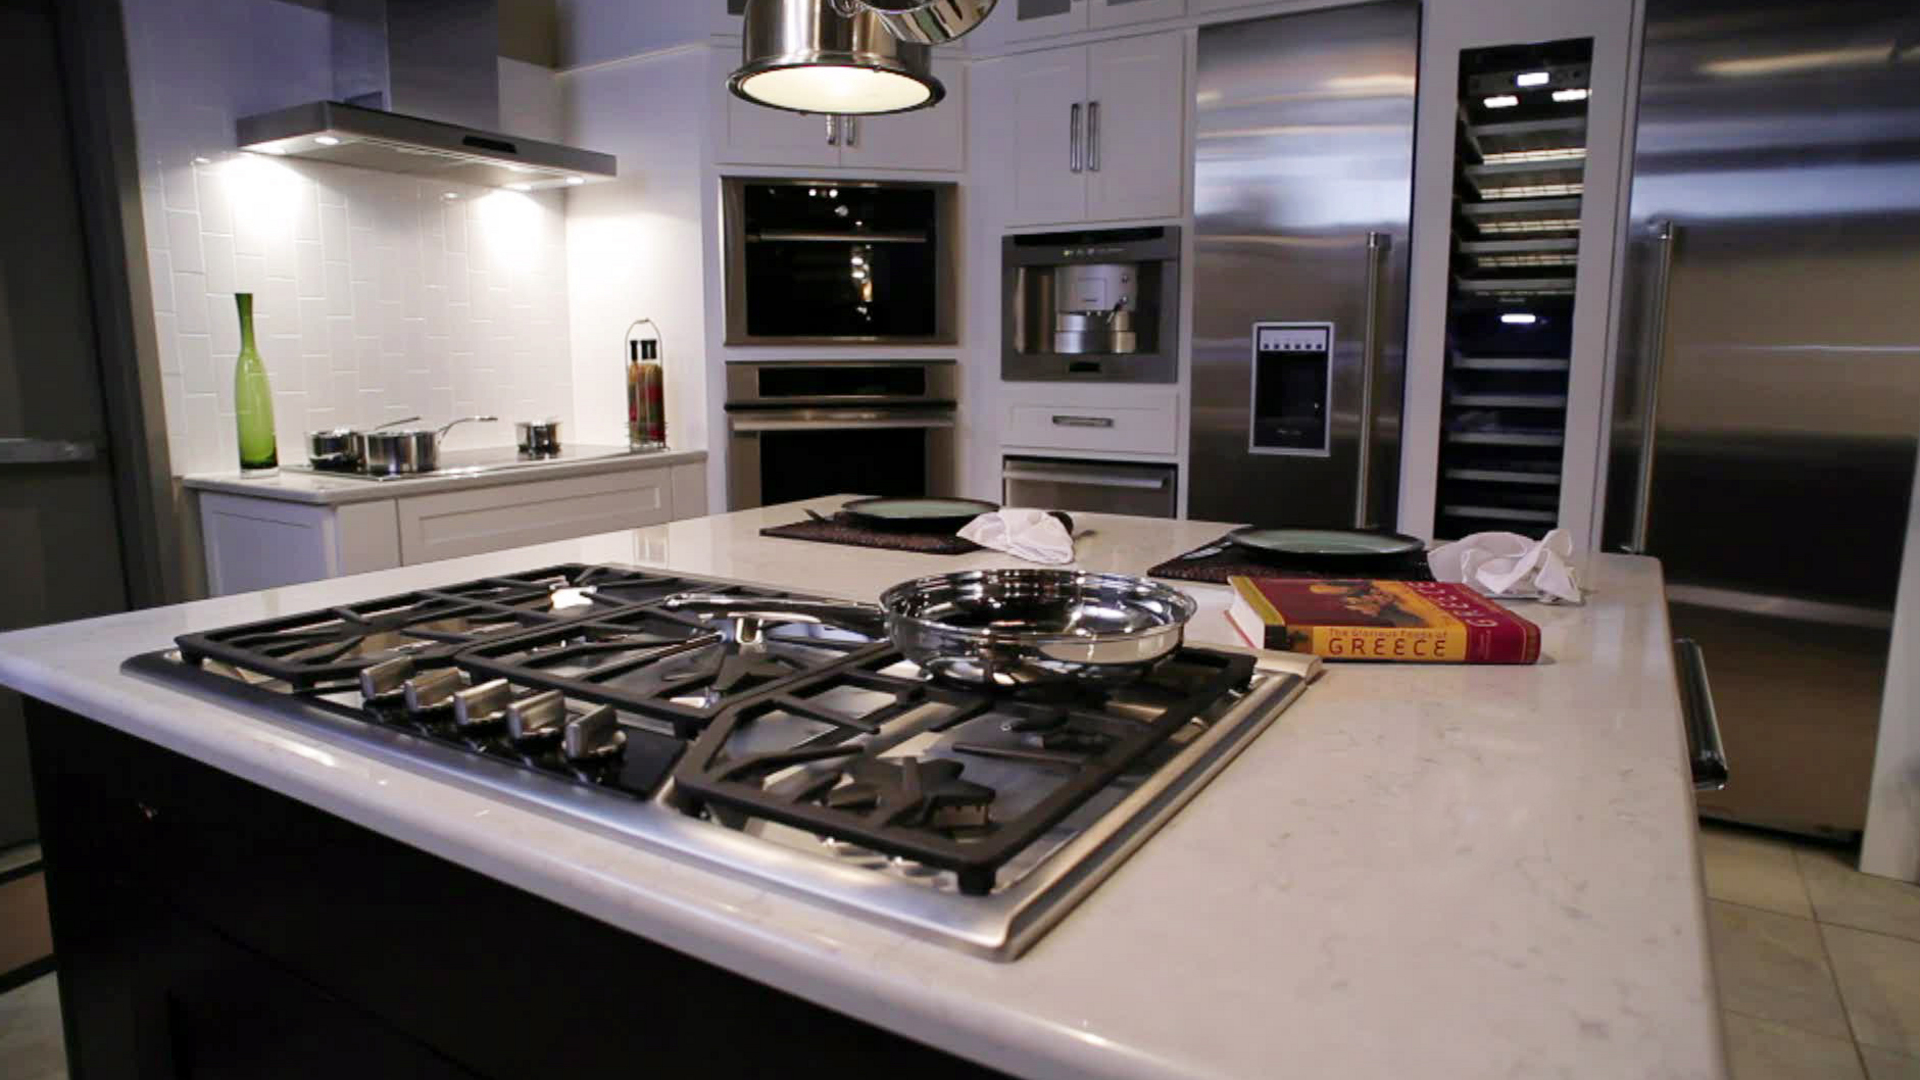 How To Get A Stunning Kitchen On A Budget Hgtv